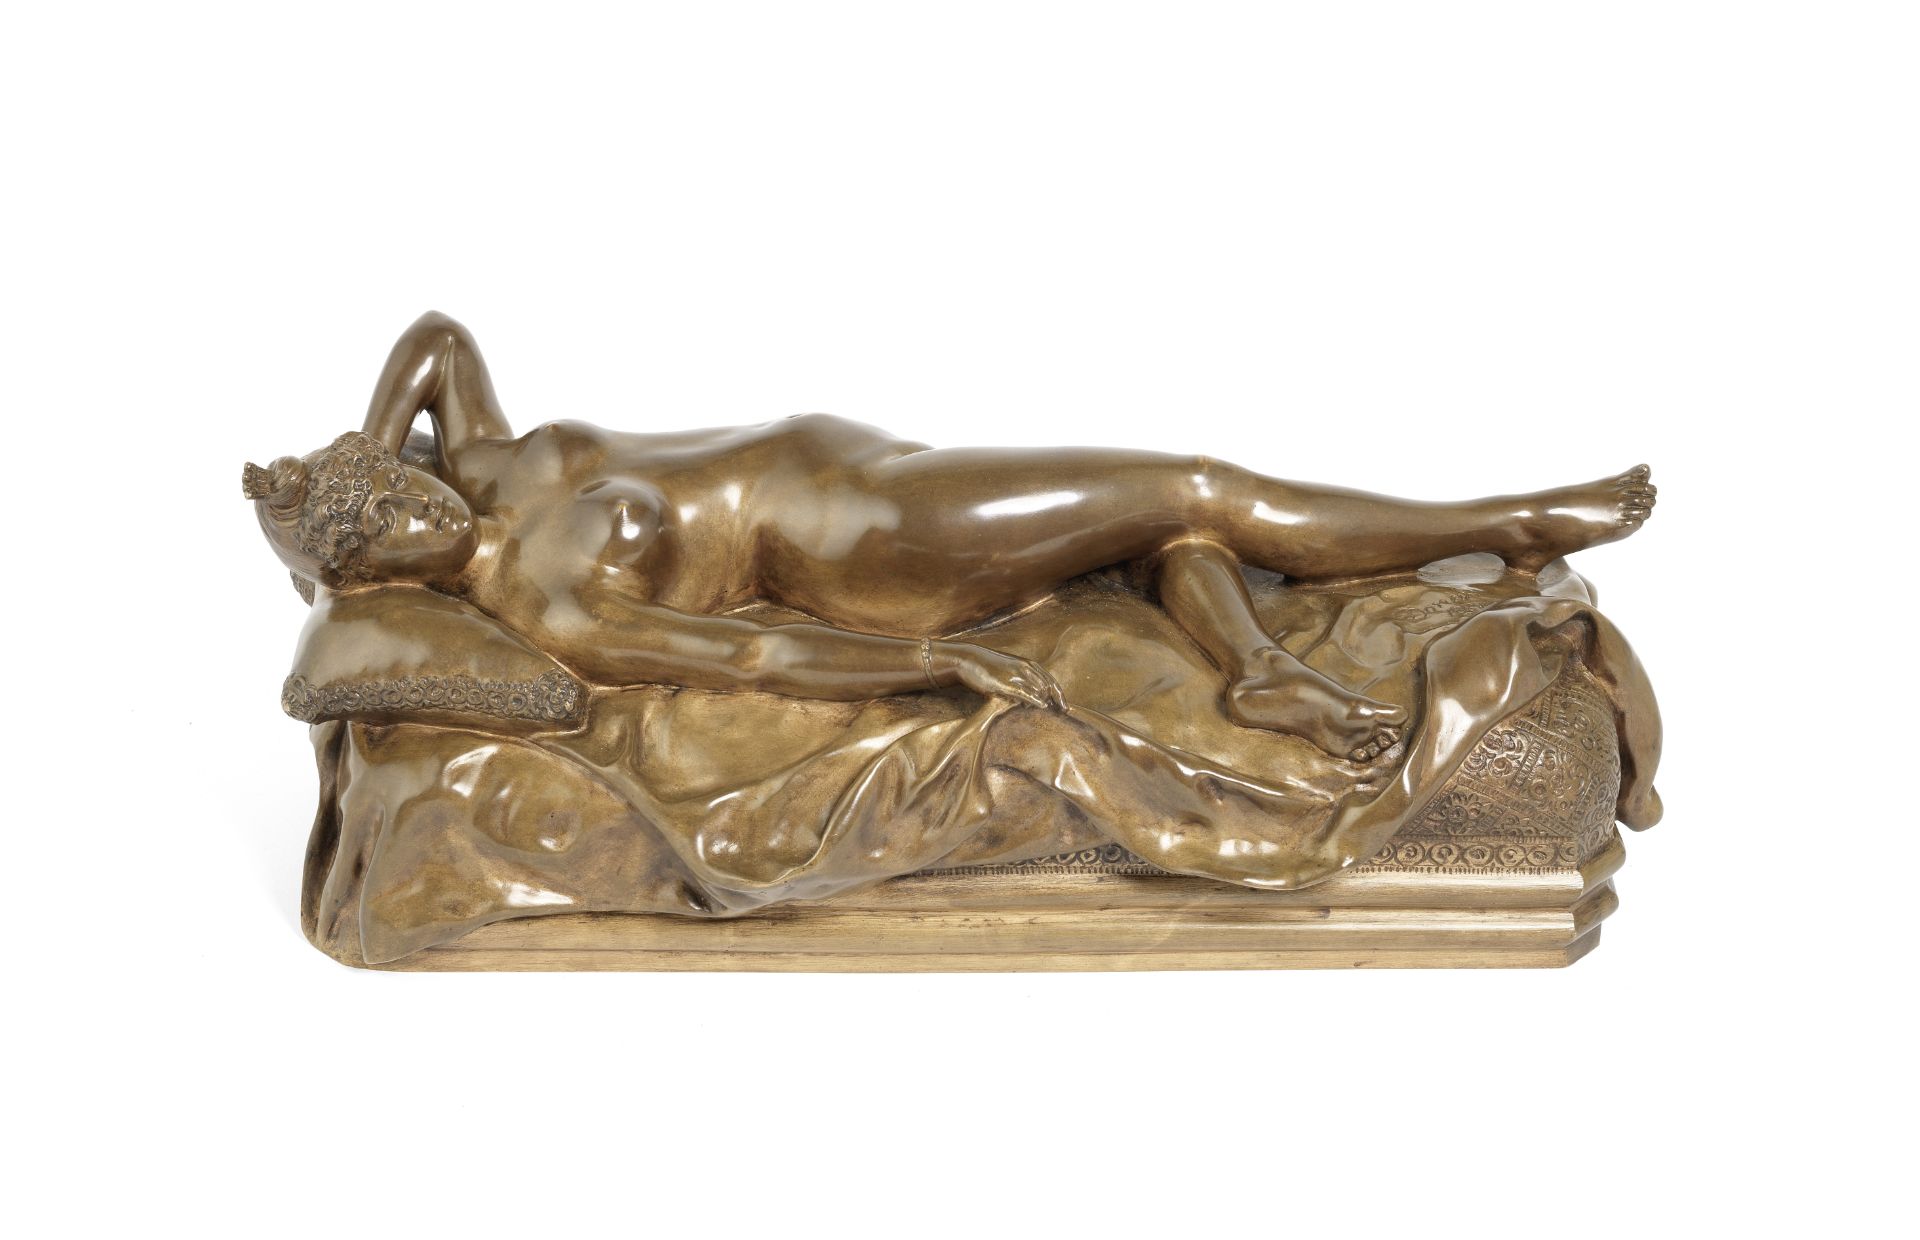 Continental A Patinated Bronze Study of a Reclining Nude Female Figure, 1887